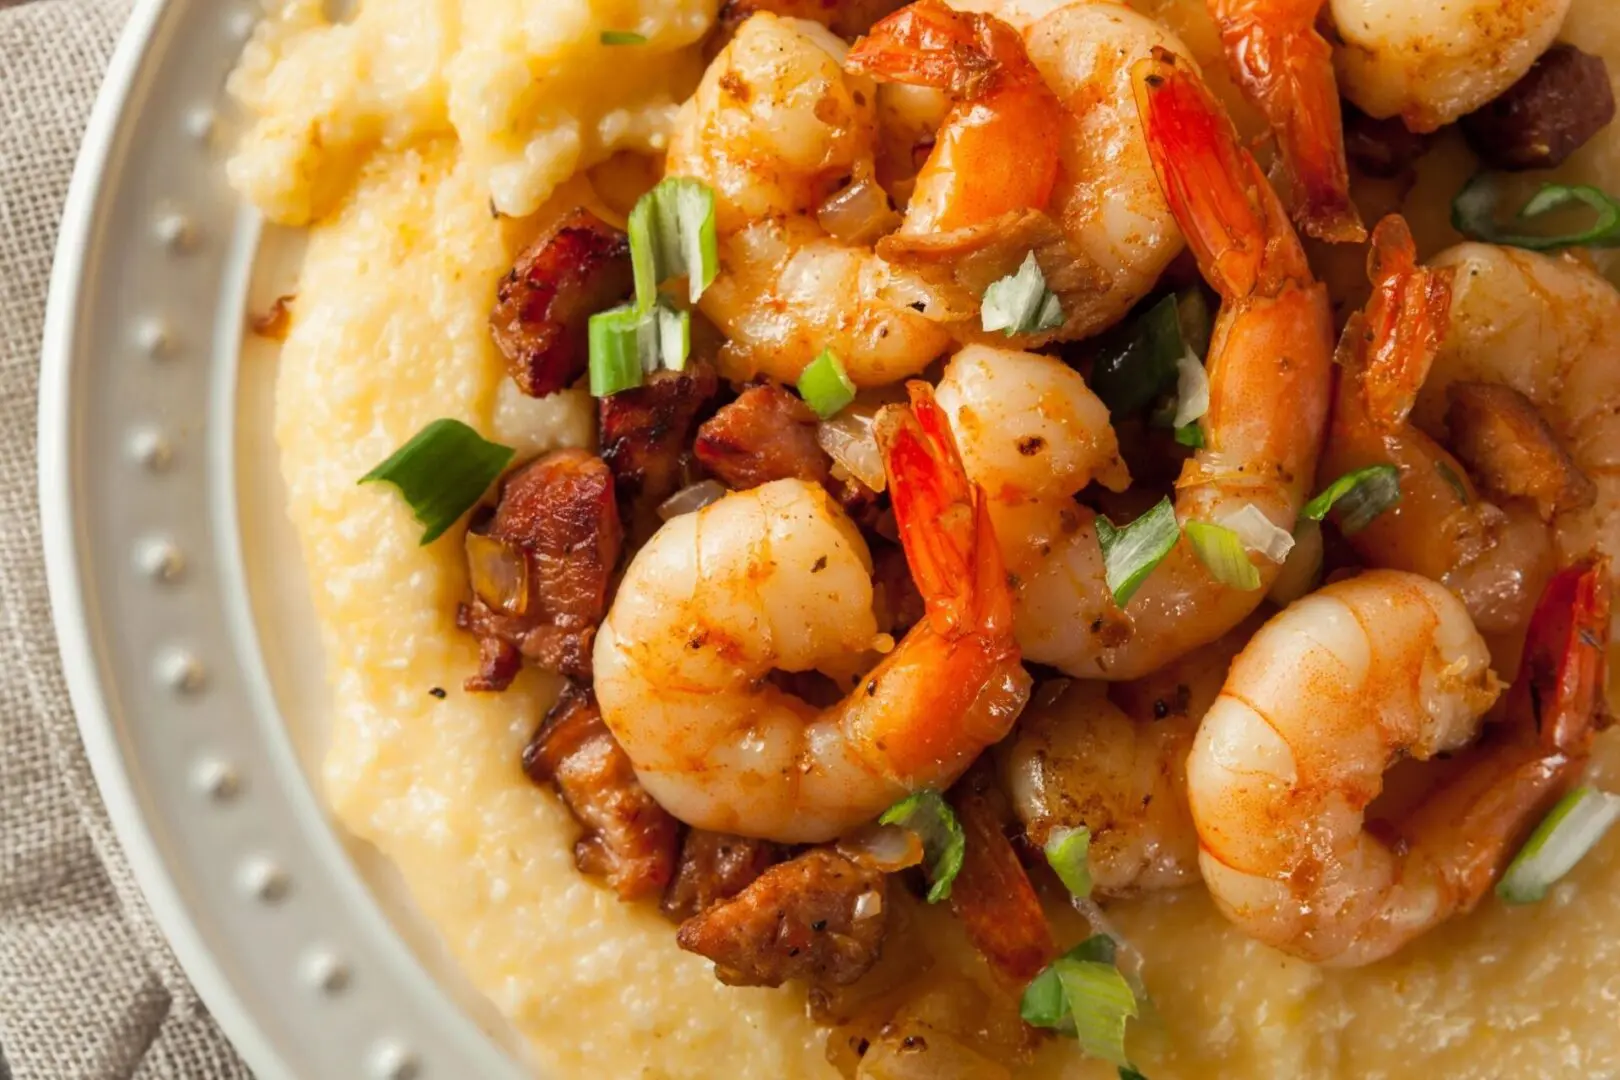 A plate of shrimp and grits with green onions.